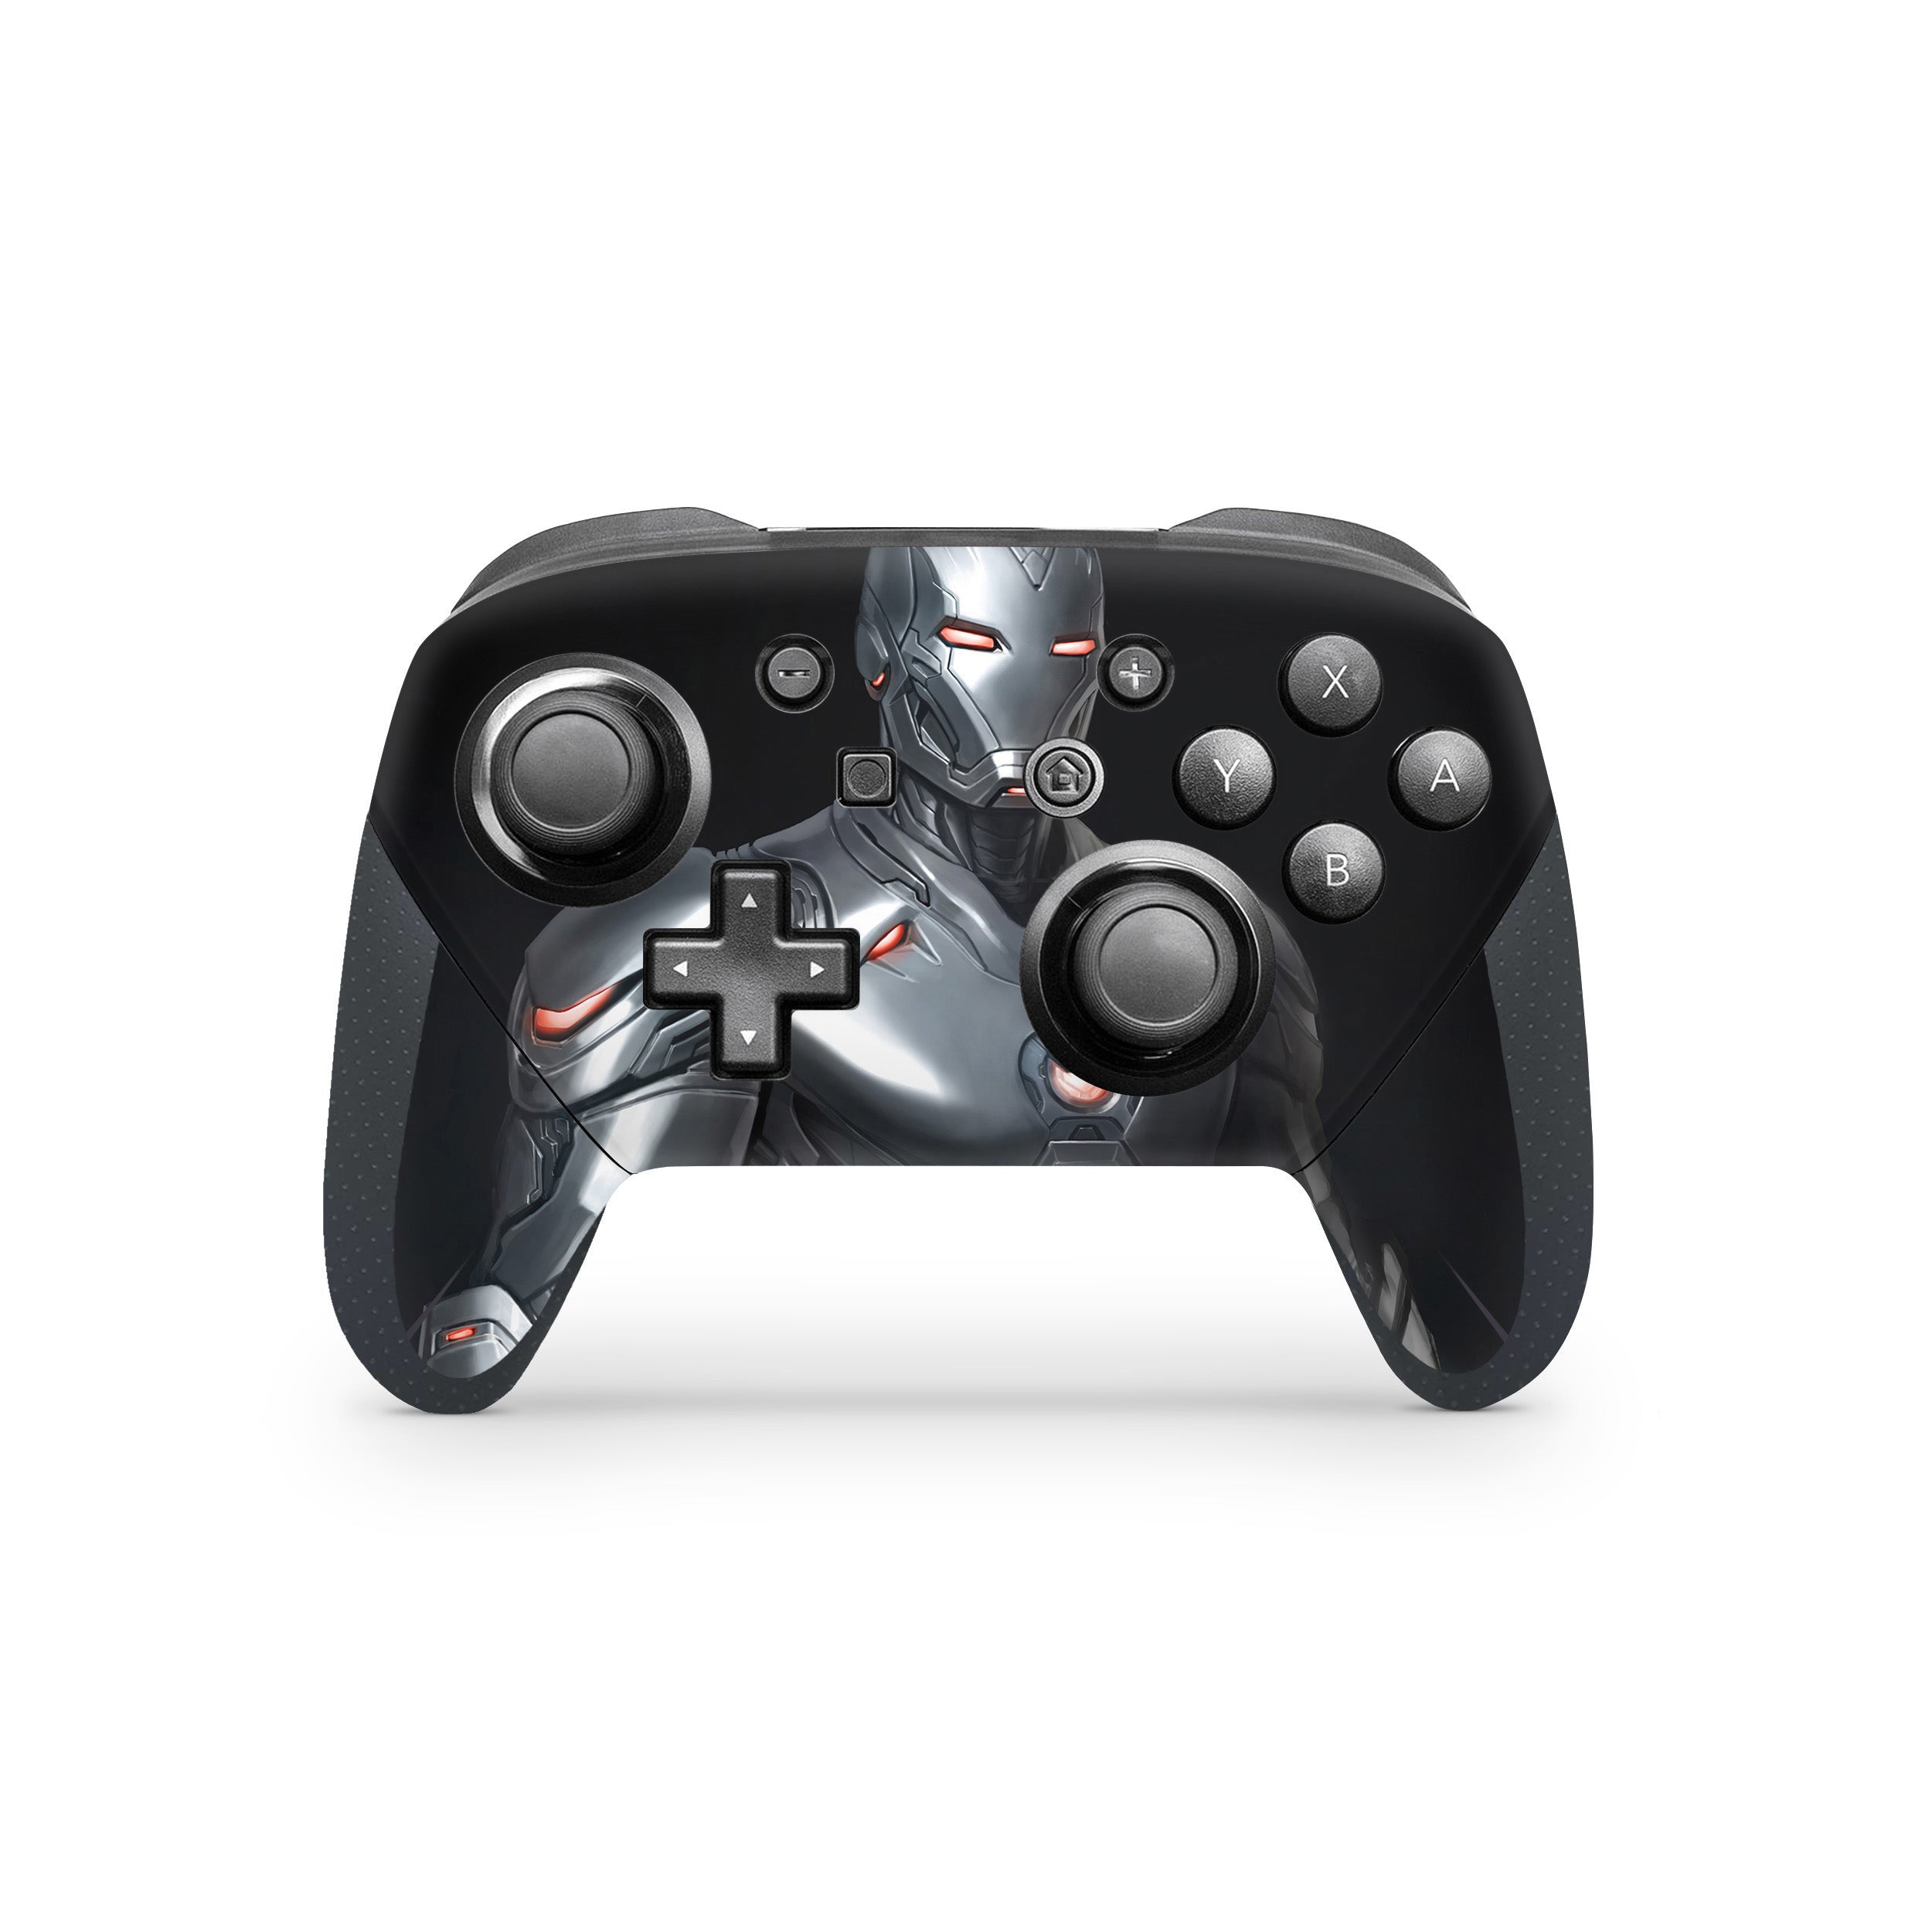 A video game skin featuring a Marvel Comics Iron Man design for the Switch Pro Controller.